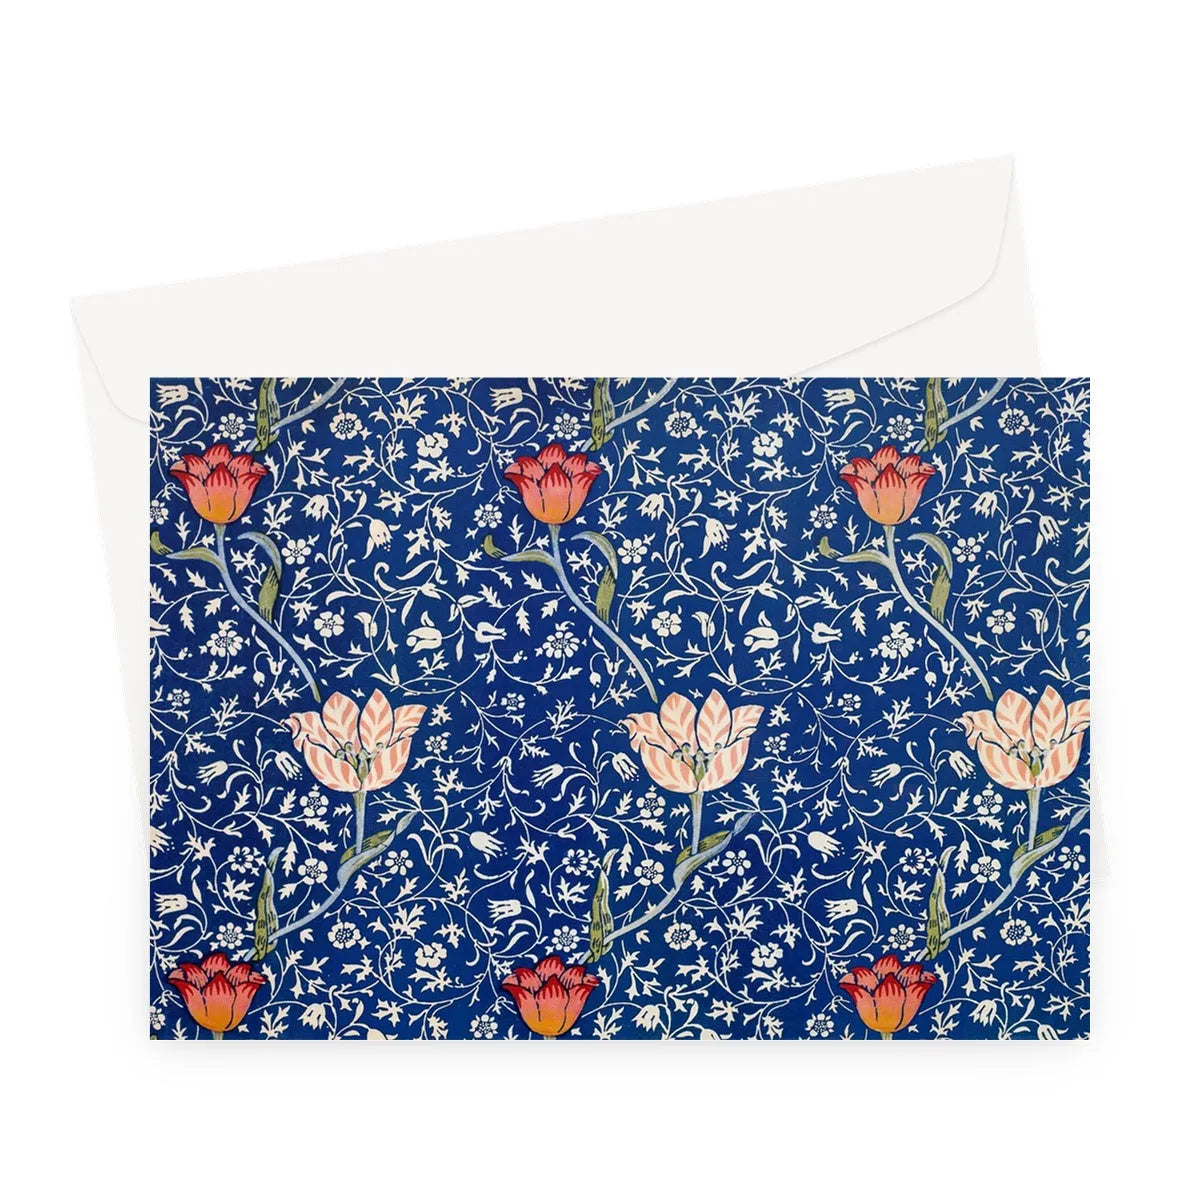 Medway By William Morris Greeting Card - A5 Landscape / 10 Cards - Greeting & Note Cards - Aesthetic Art